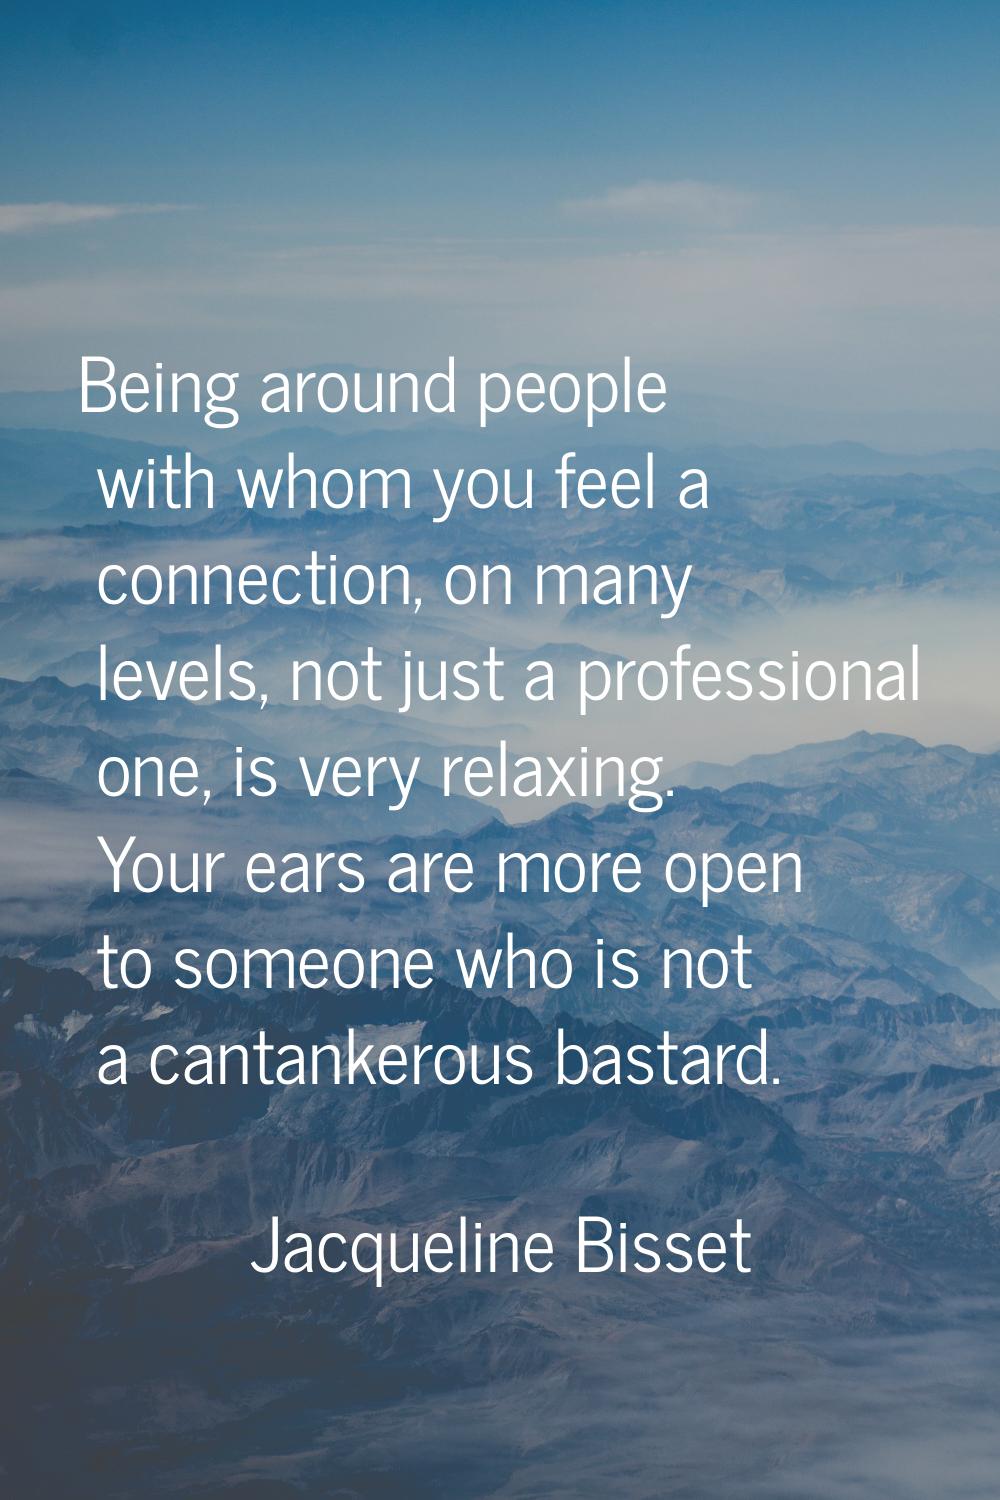 Being around people with whom you feel a connection, on many levels, not just a professional one, i